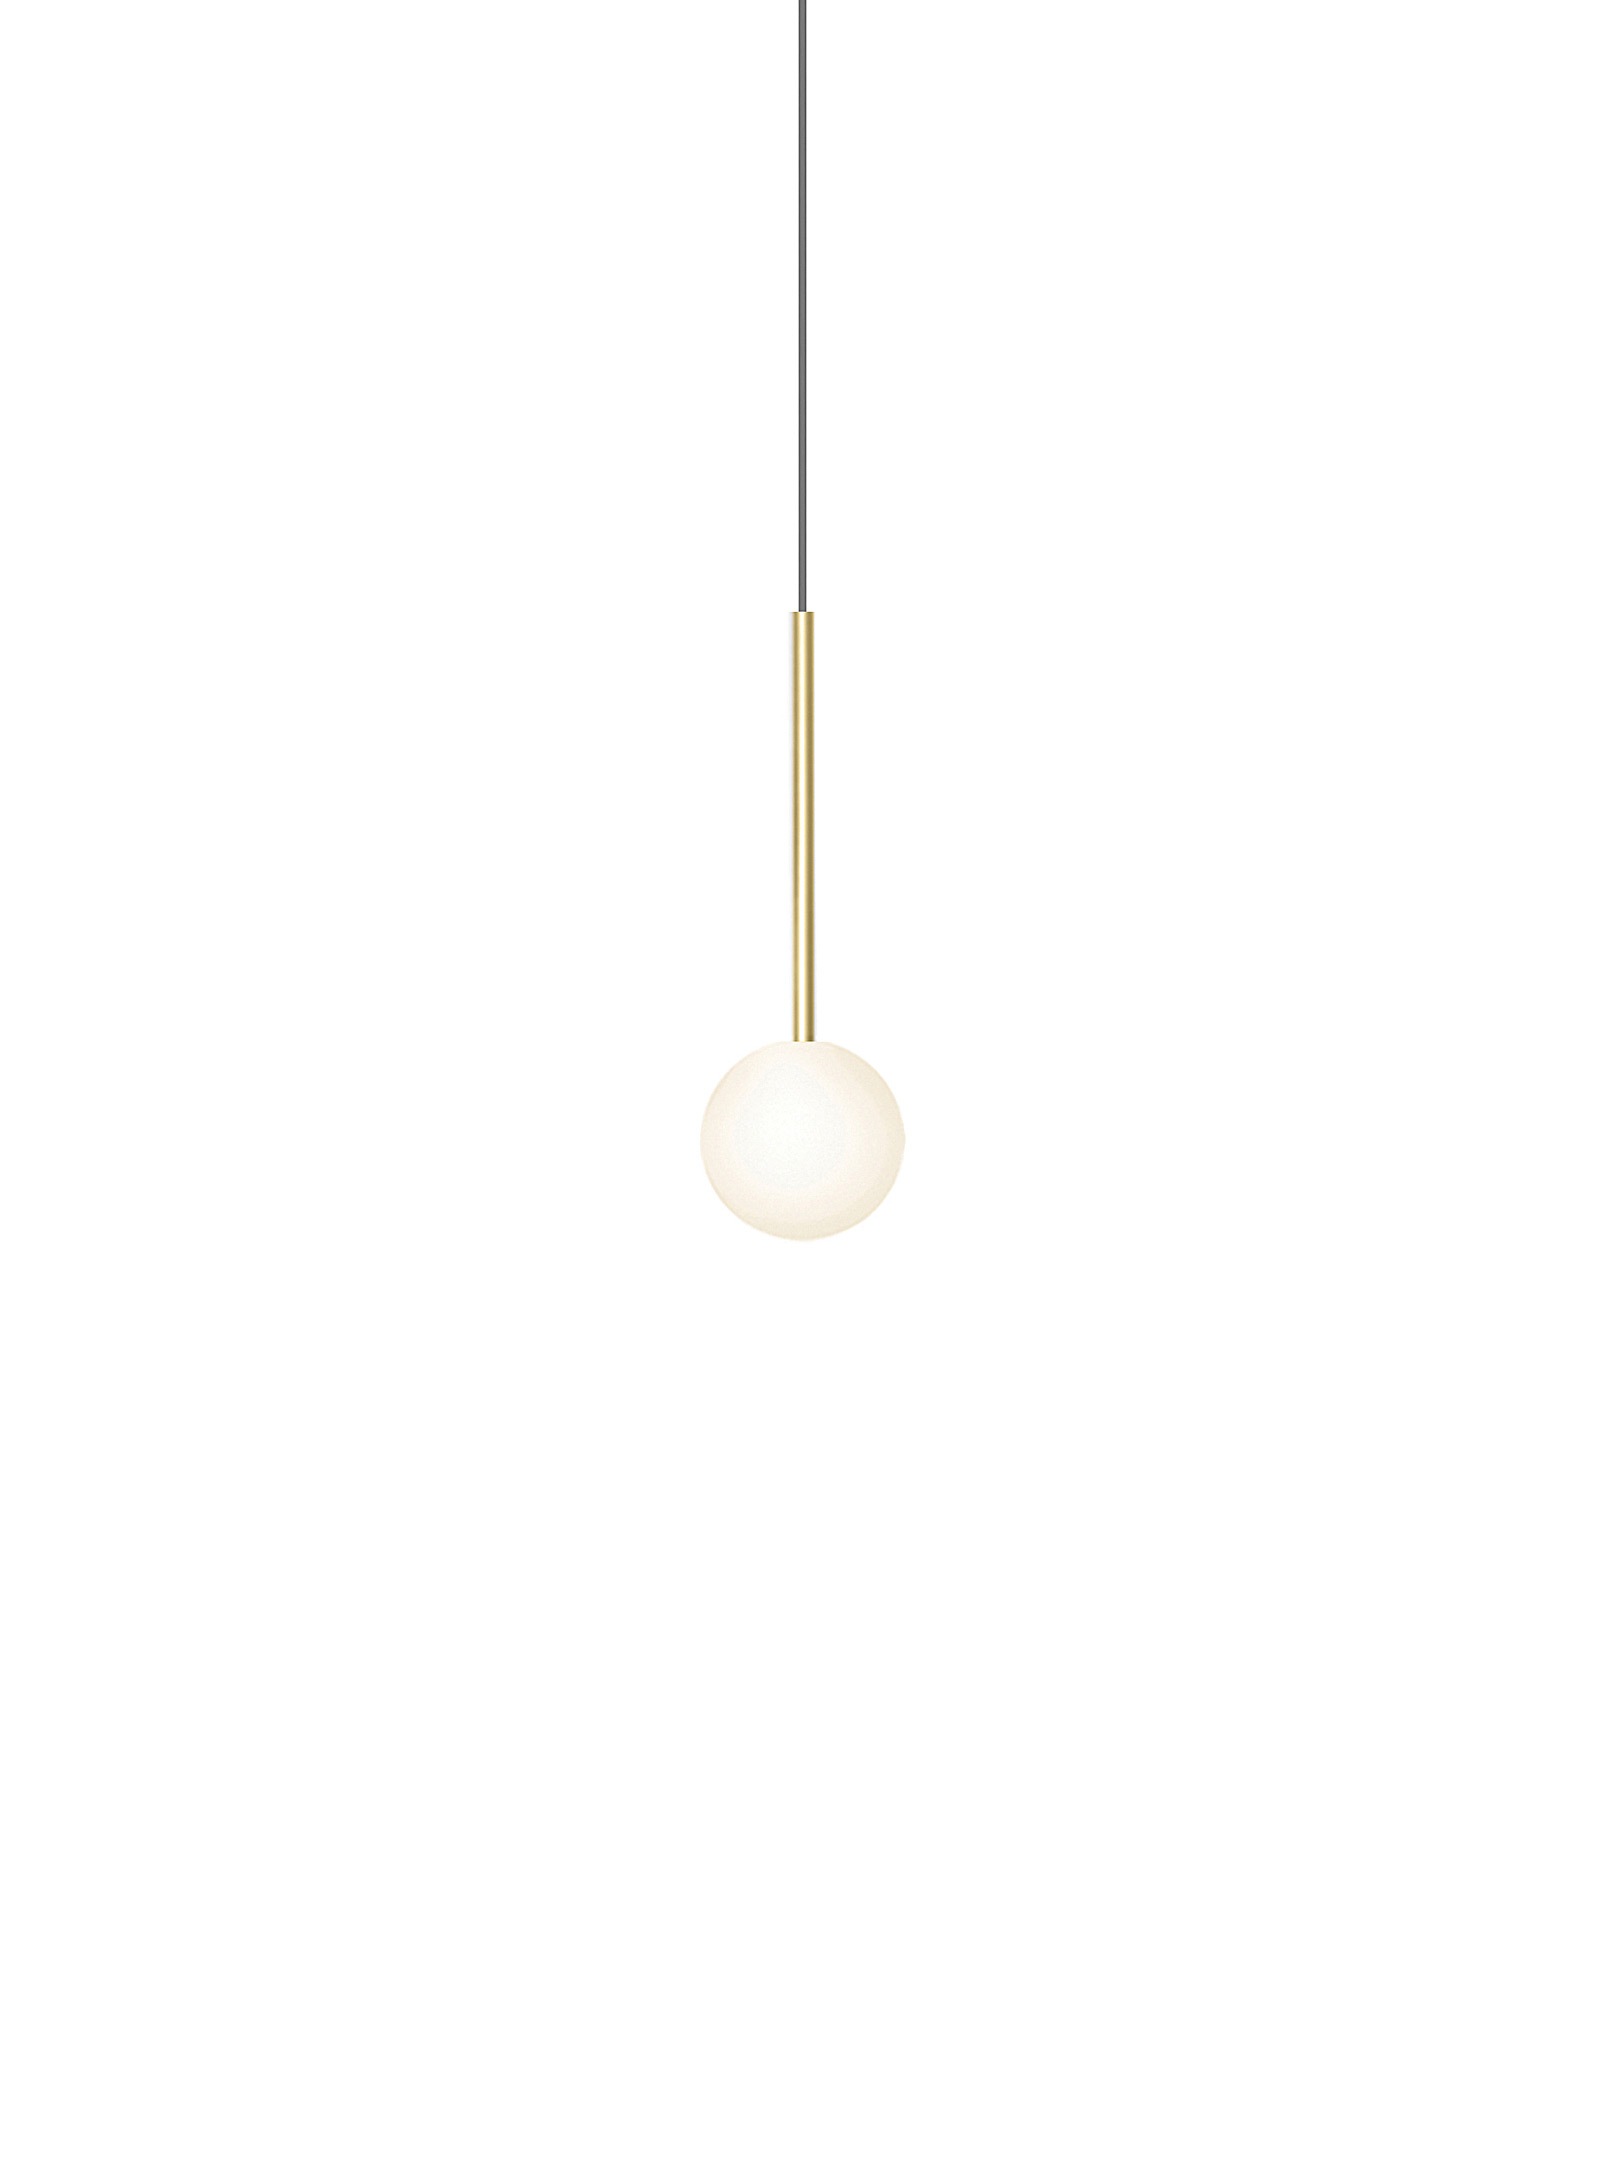 Pablo Designs Bola Sphere Pendant See Available Sizes In Assorted